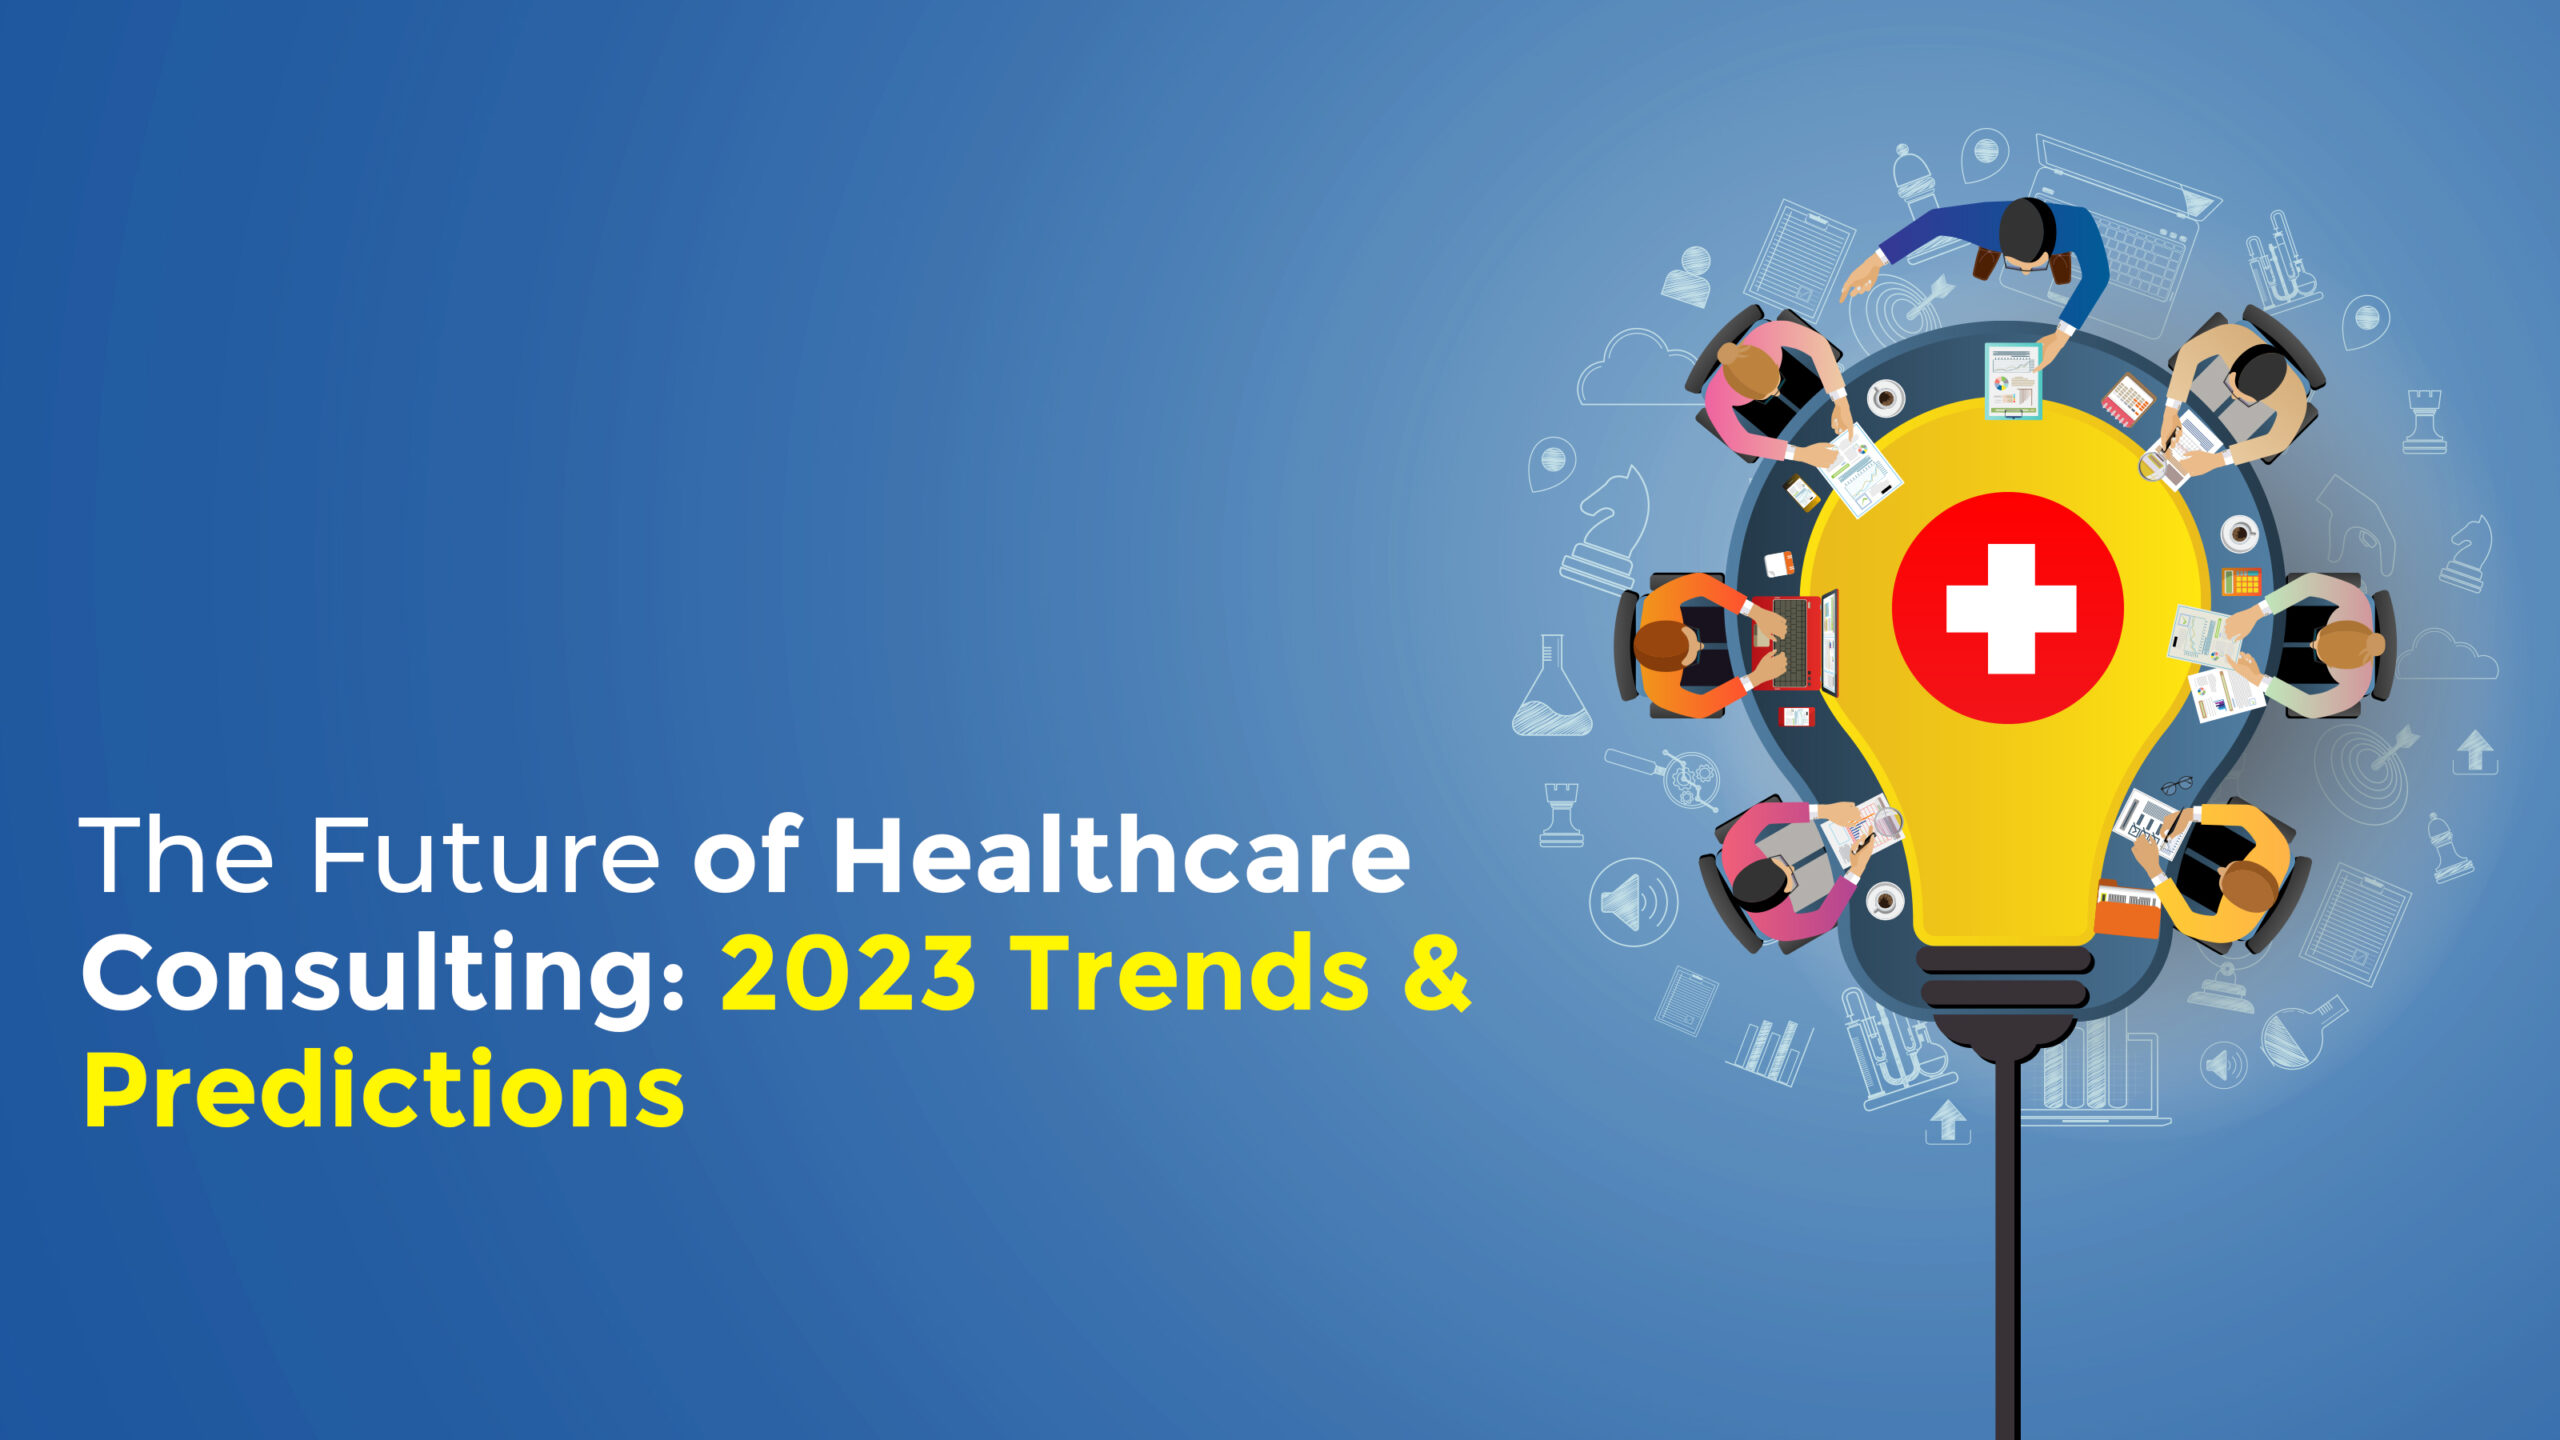 Future of Healthcare Consulting 2023 Trends & Predictions